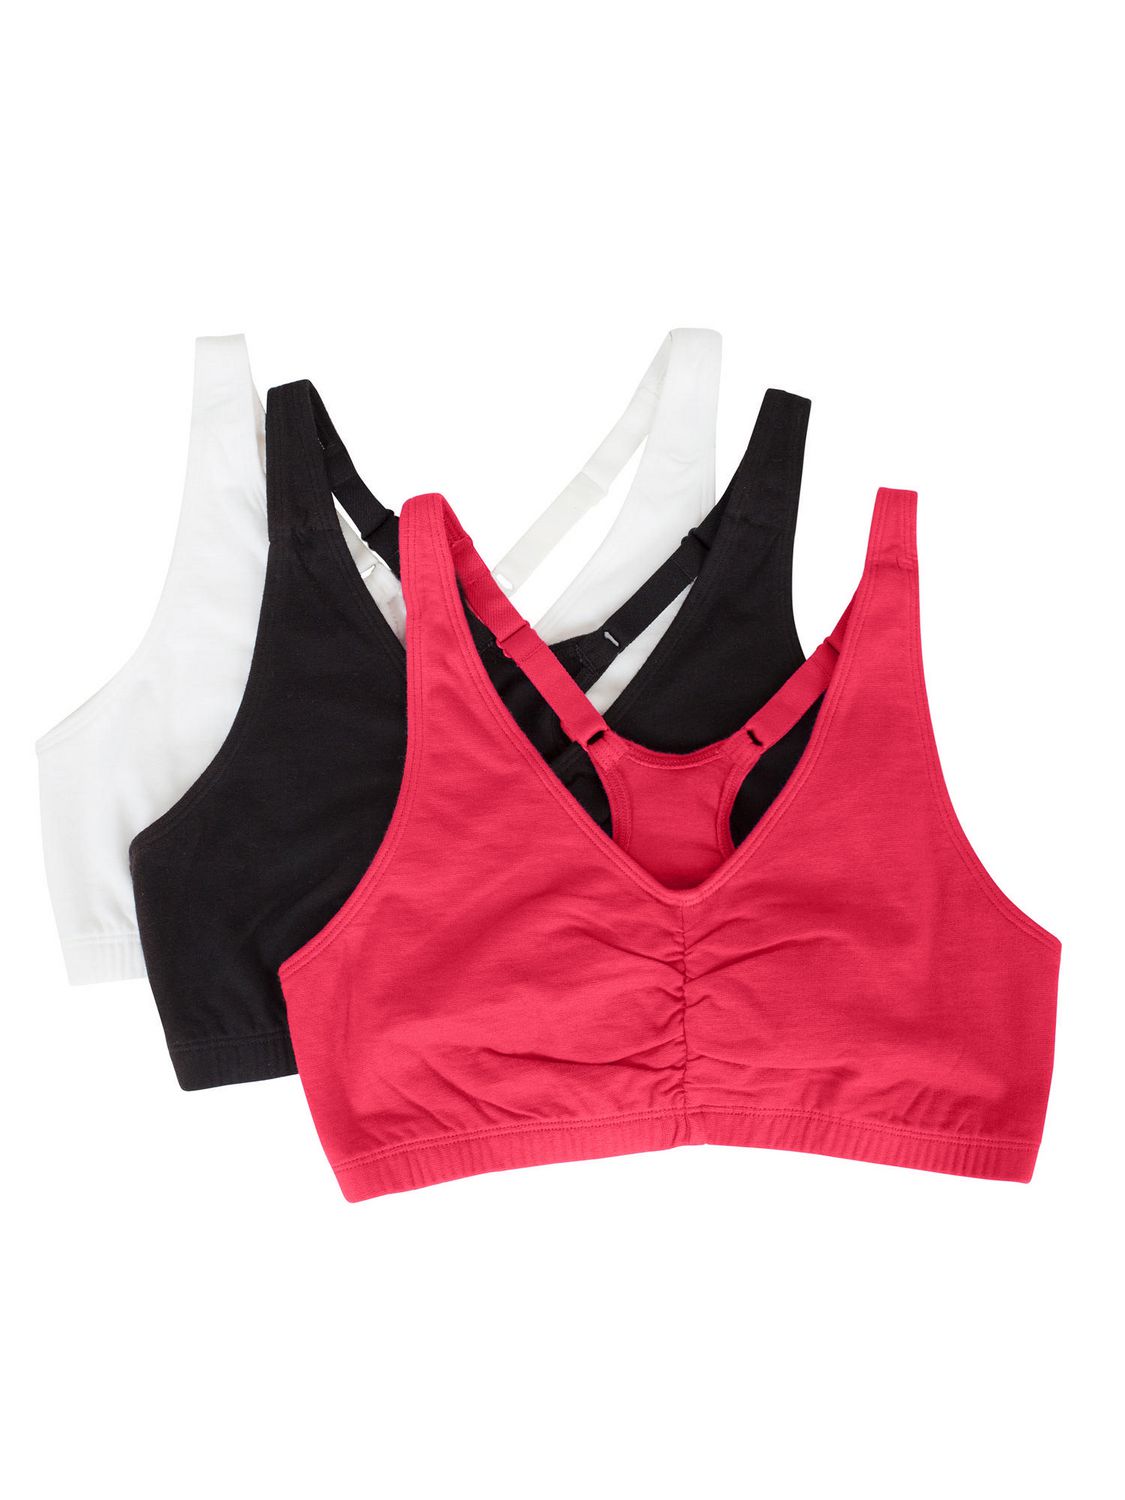 Sports Bras for sale in Crooked Lake, Indiana